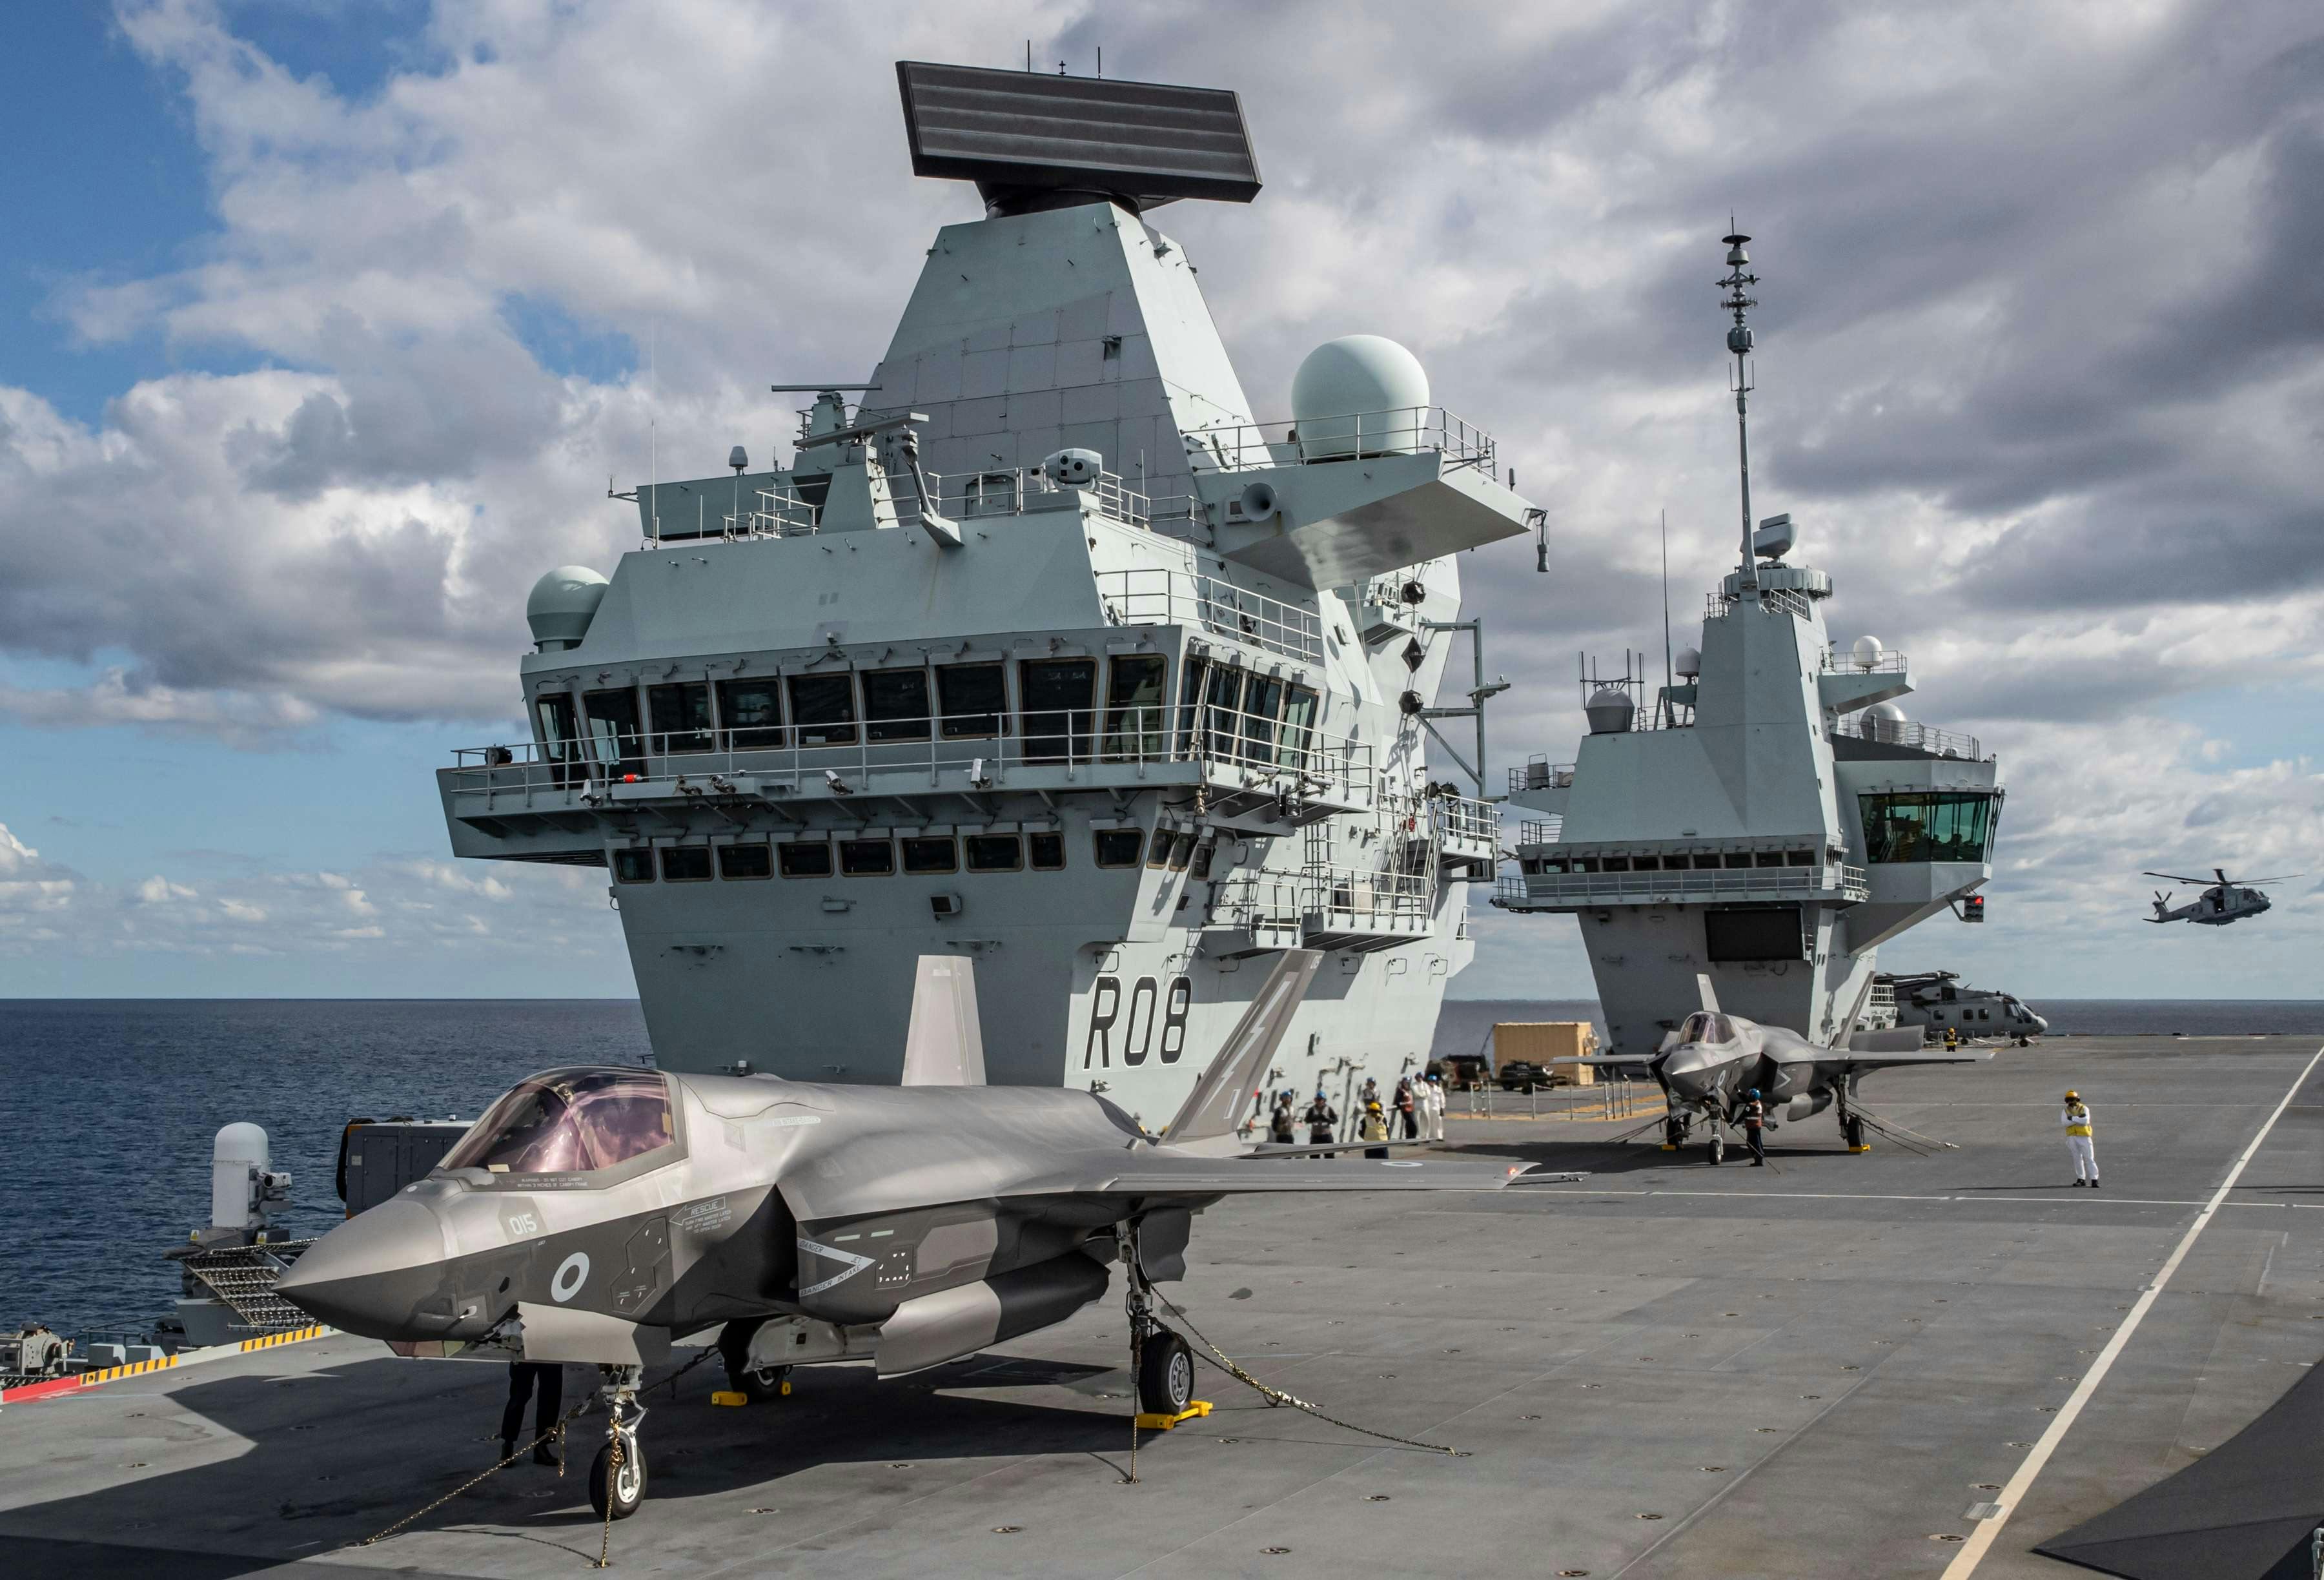 A Guide To The Queen Elizabeth Class Aircraft Carriers